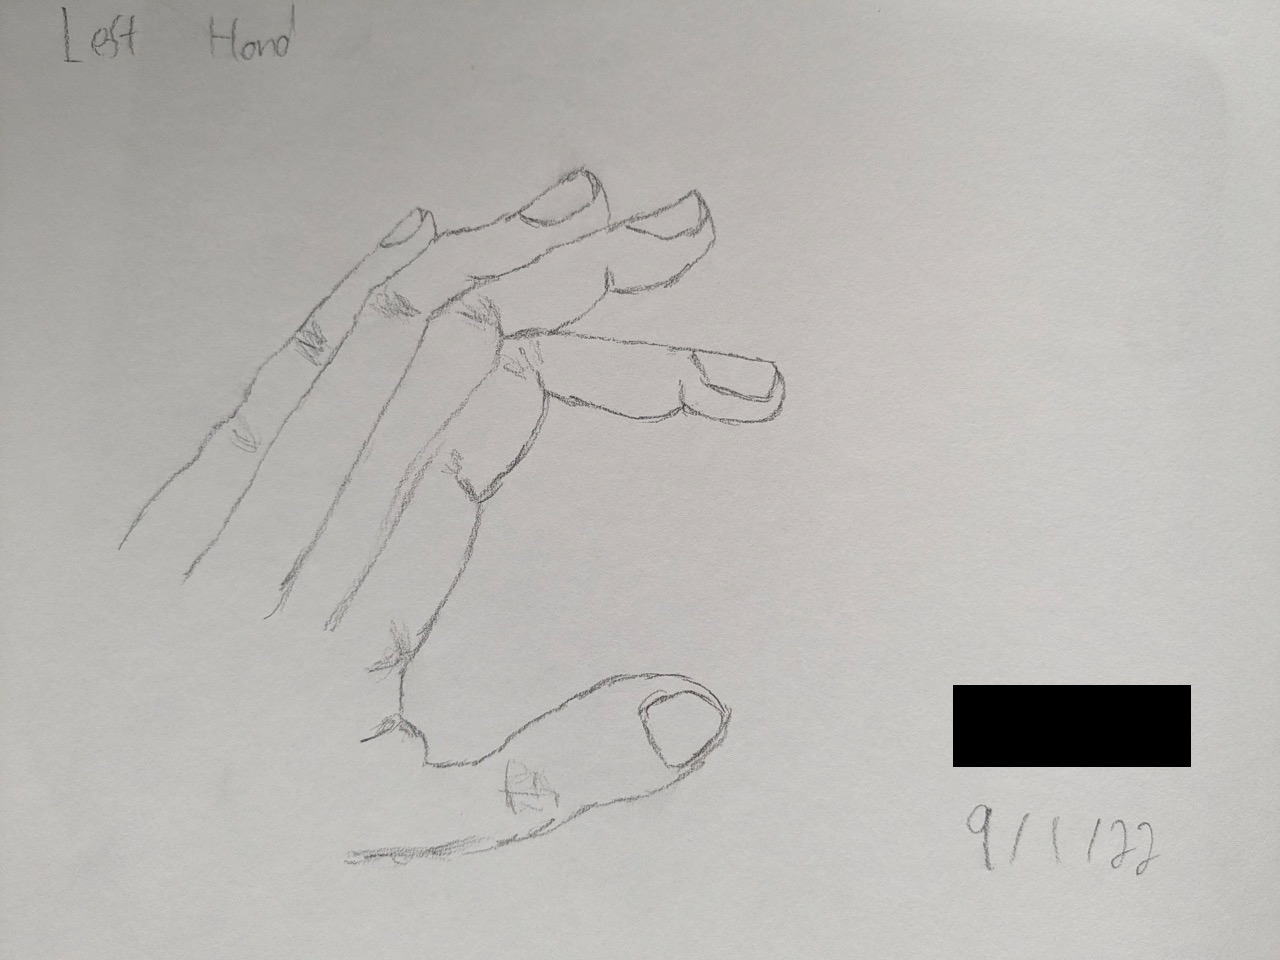 A malformed drawing of a left hand, with too-long fingers and a bulbous thumb.